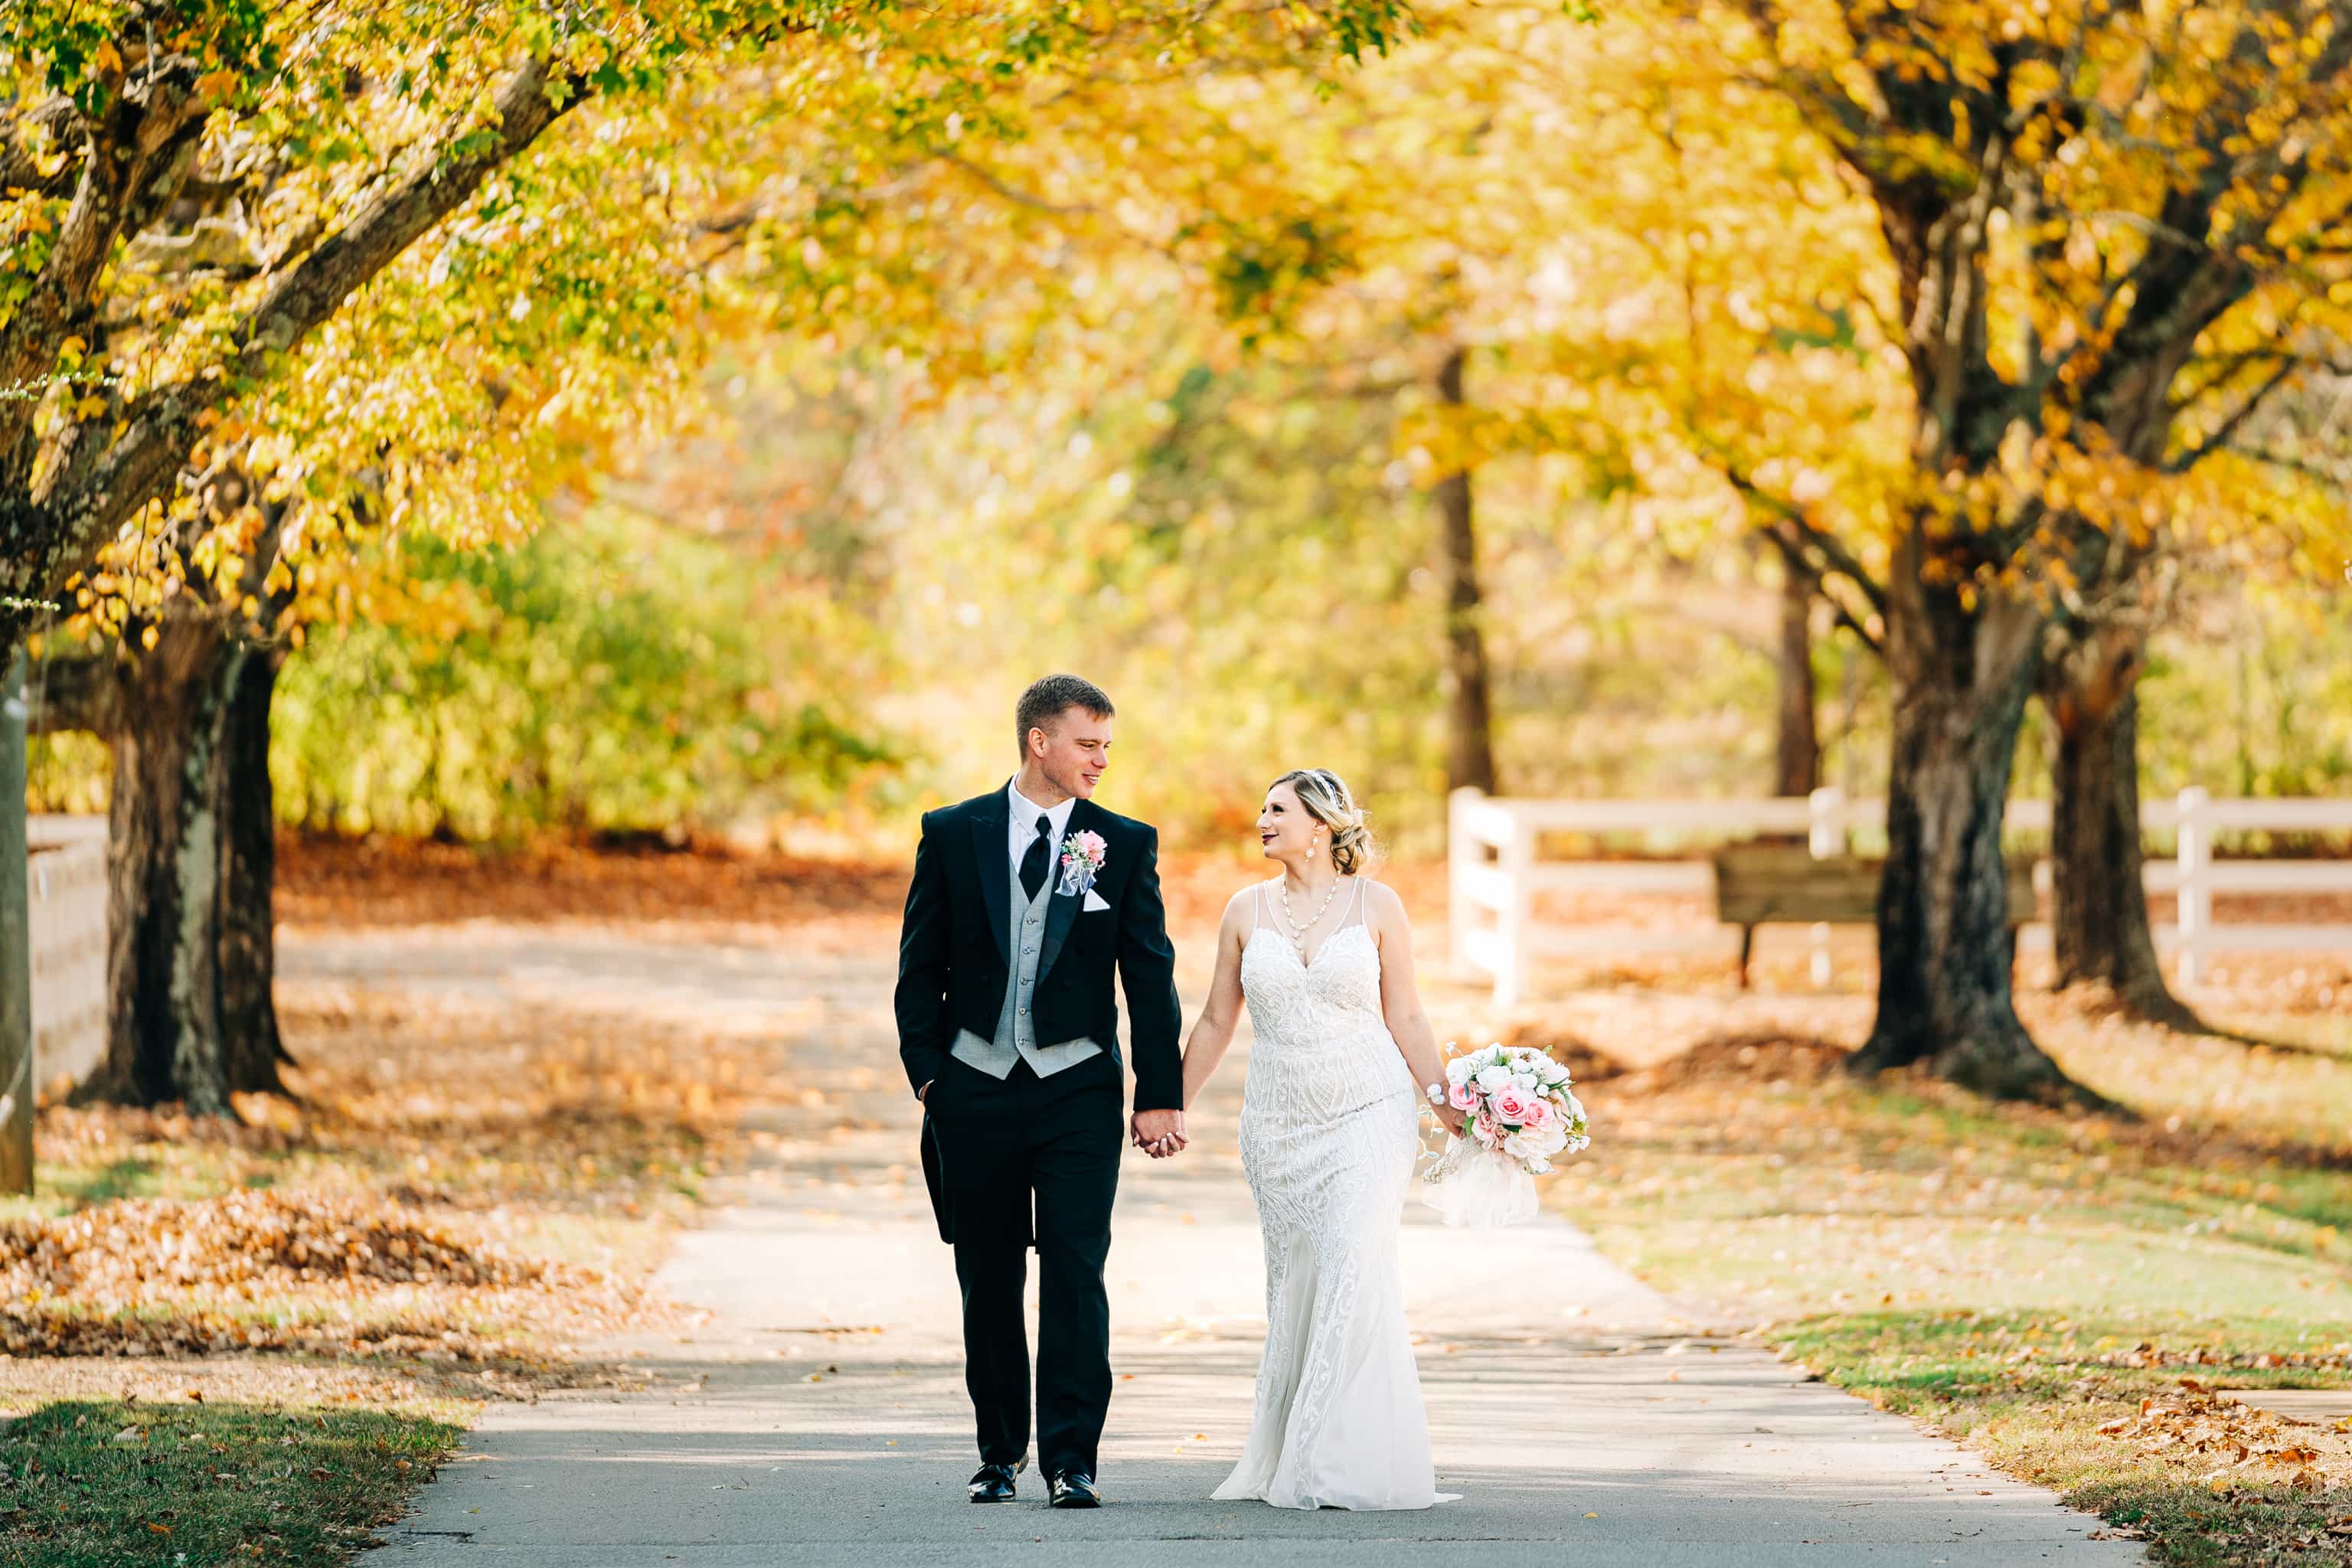 Bride and Groom walking down a road in fall